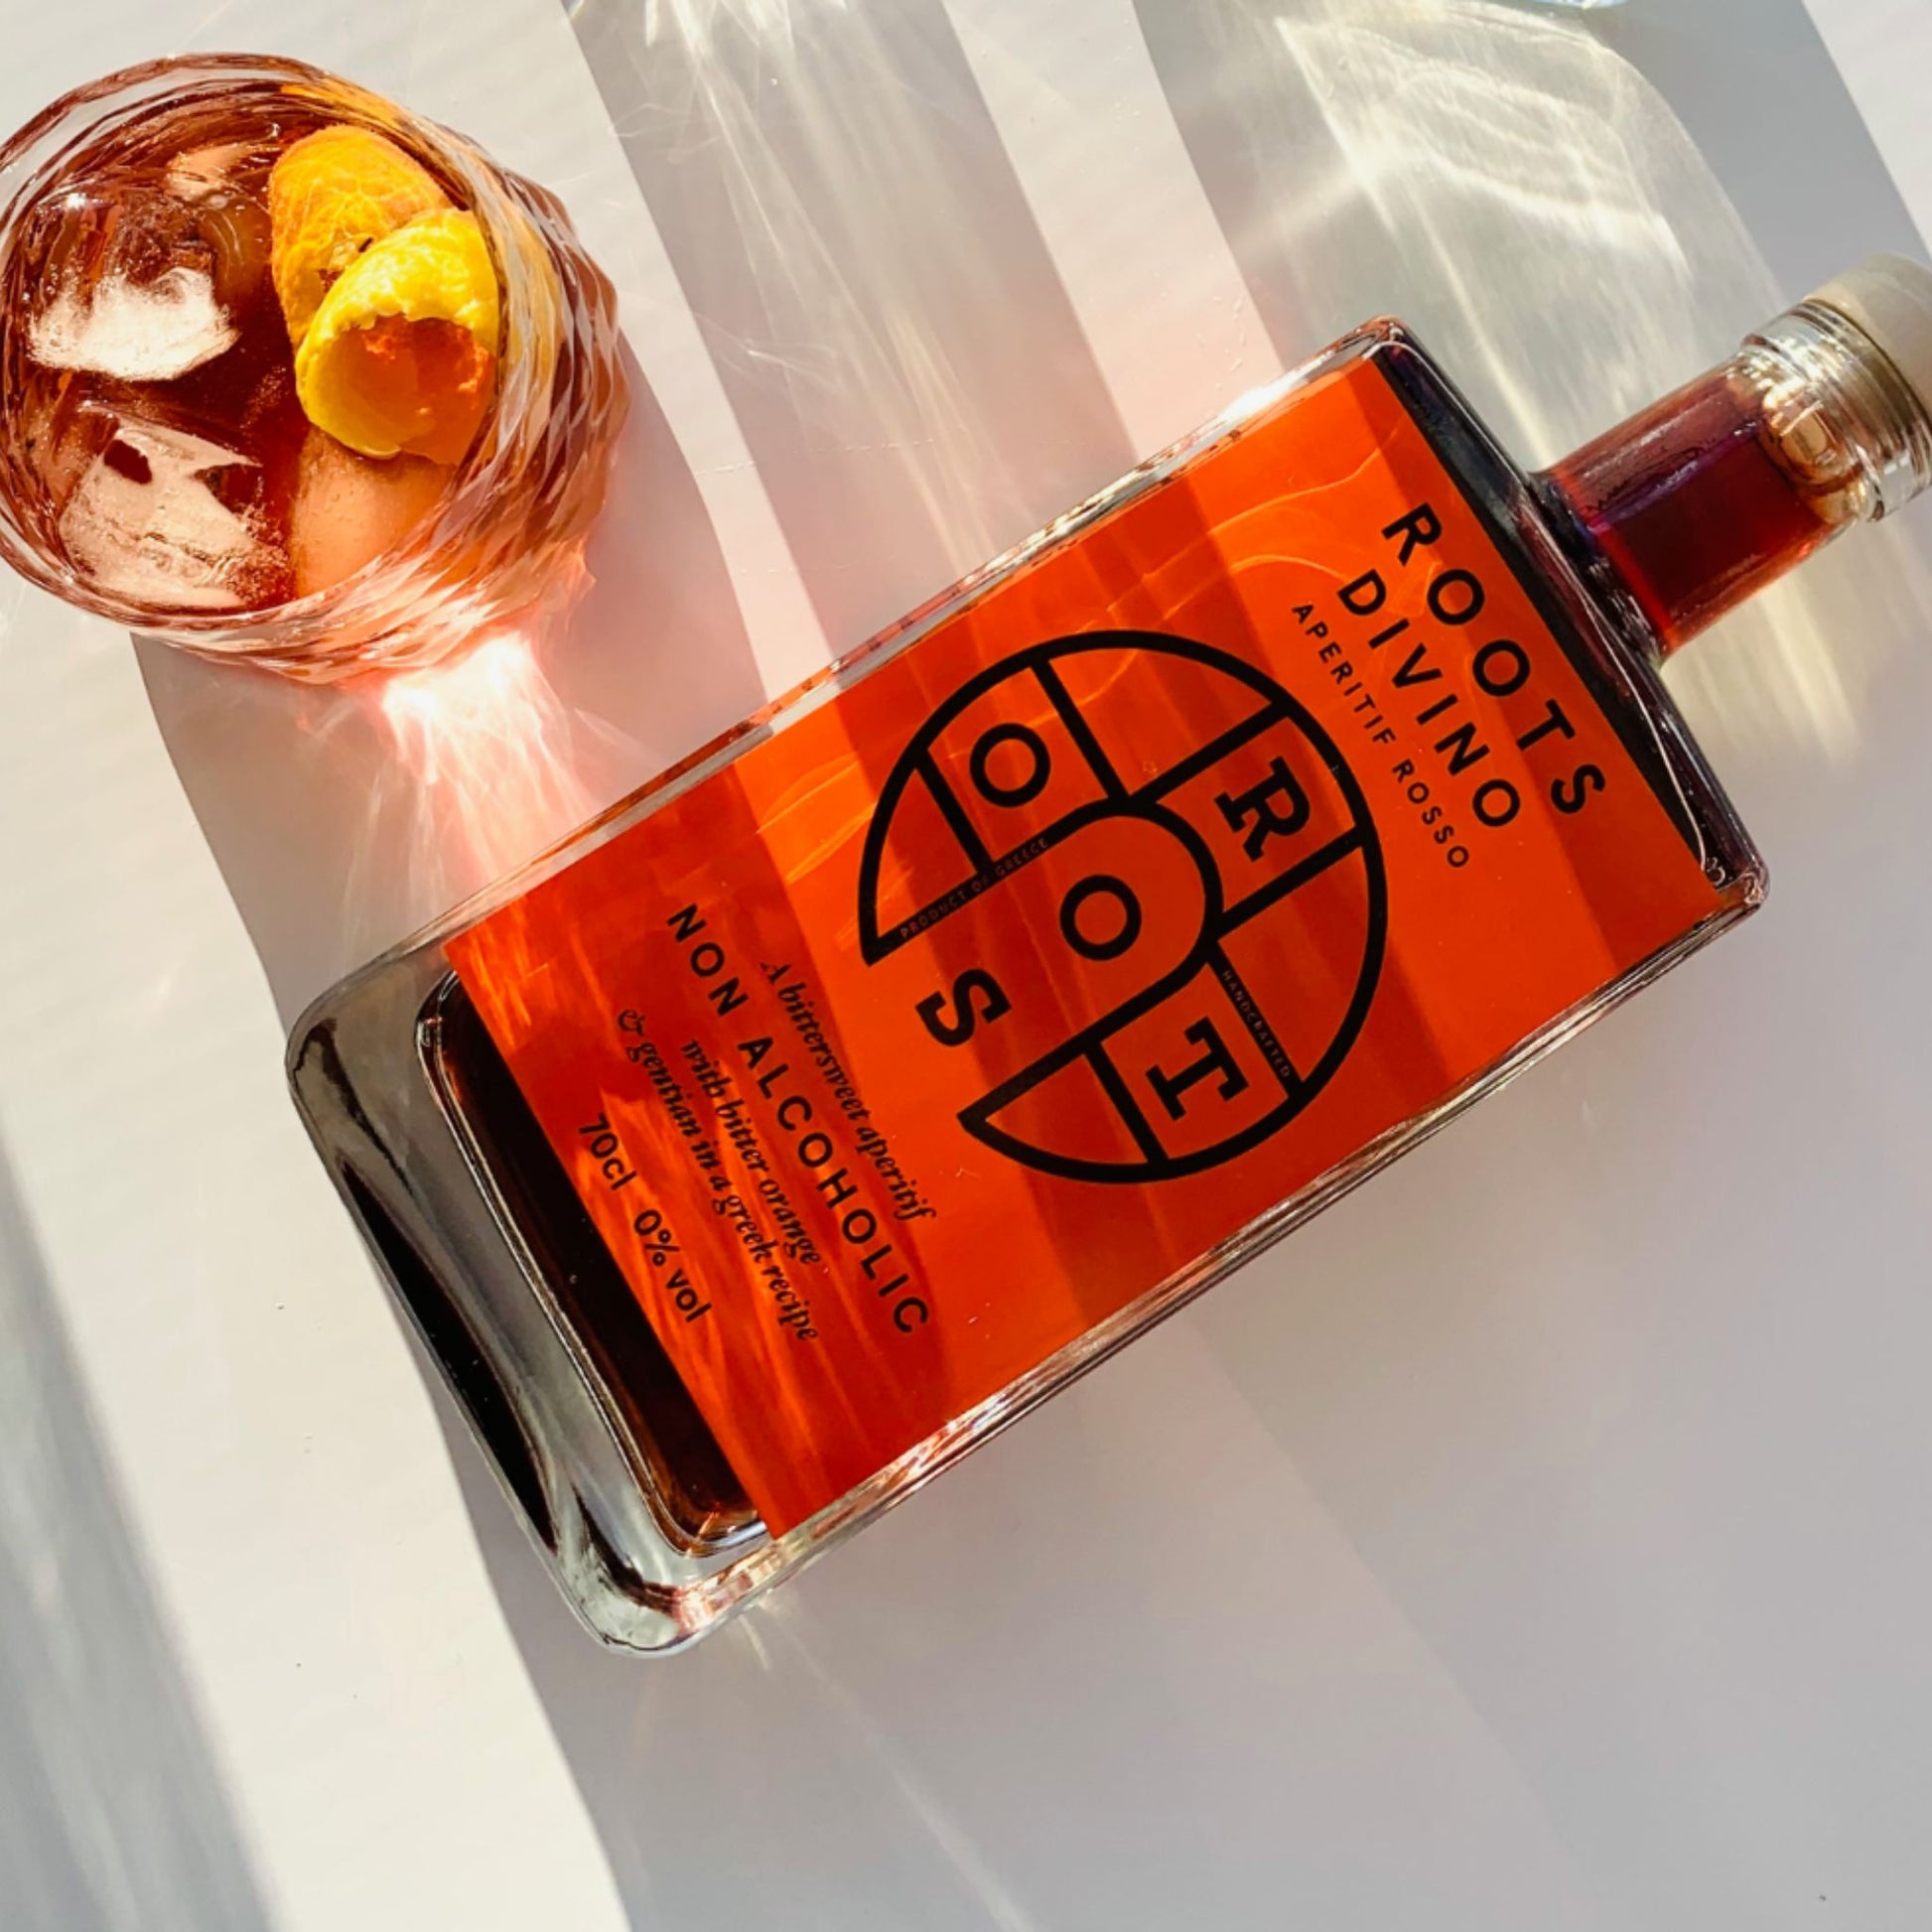 Roots Divino Aperitif Rosso non-alcoholic vermouth is available for sale at Knyota Drinks in Ottawa.